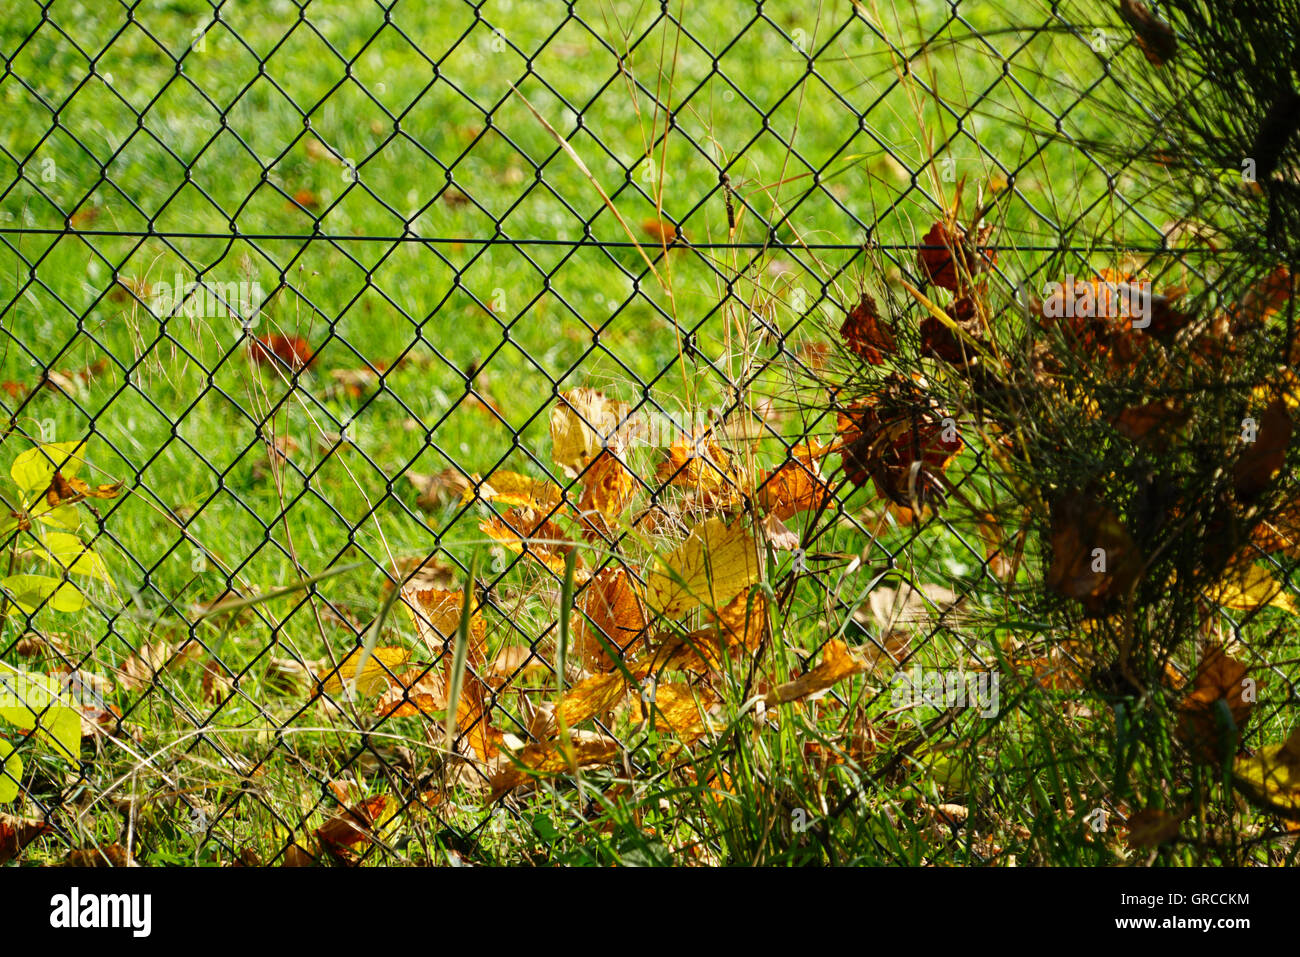 Autumn Leaves On Chain-Link Fence Stock Photo